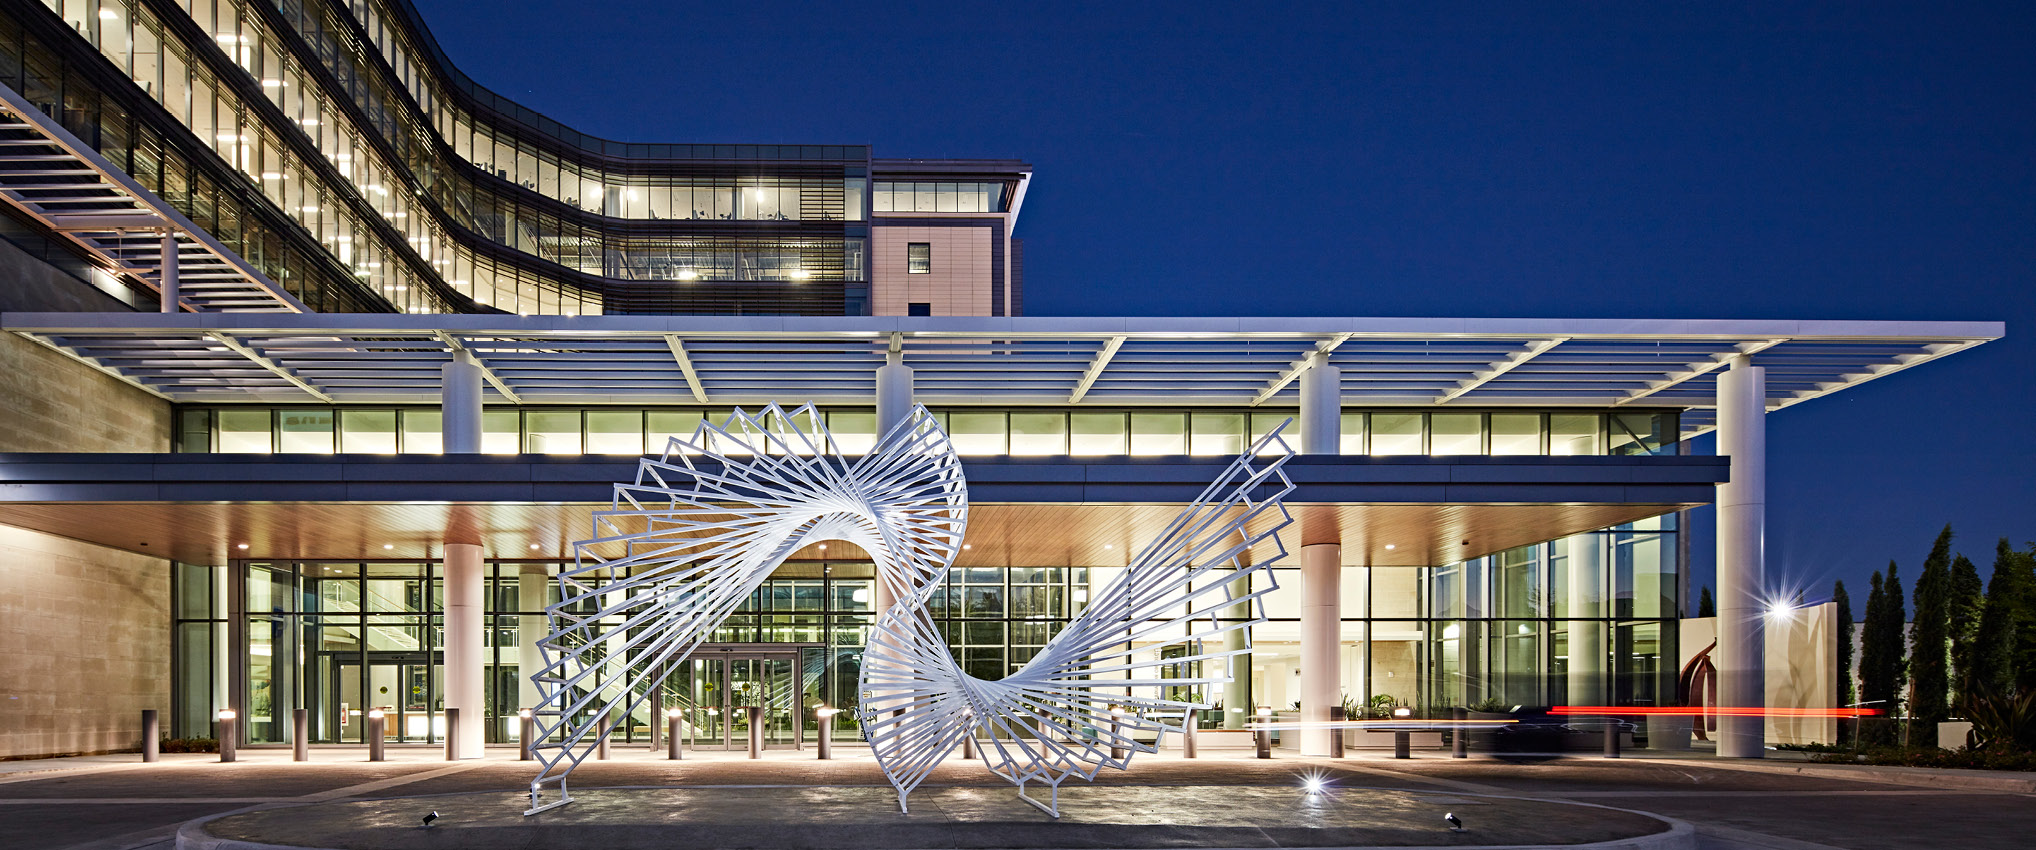 AIA Orlando Honors HKS with 2018 Unbuilt Award of Excellence for Baptist MD Anderson Cancer Center